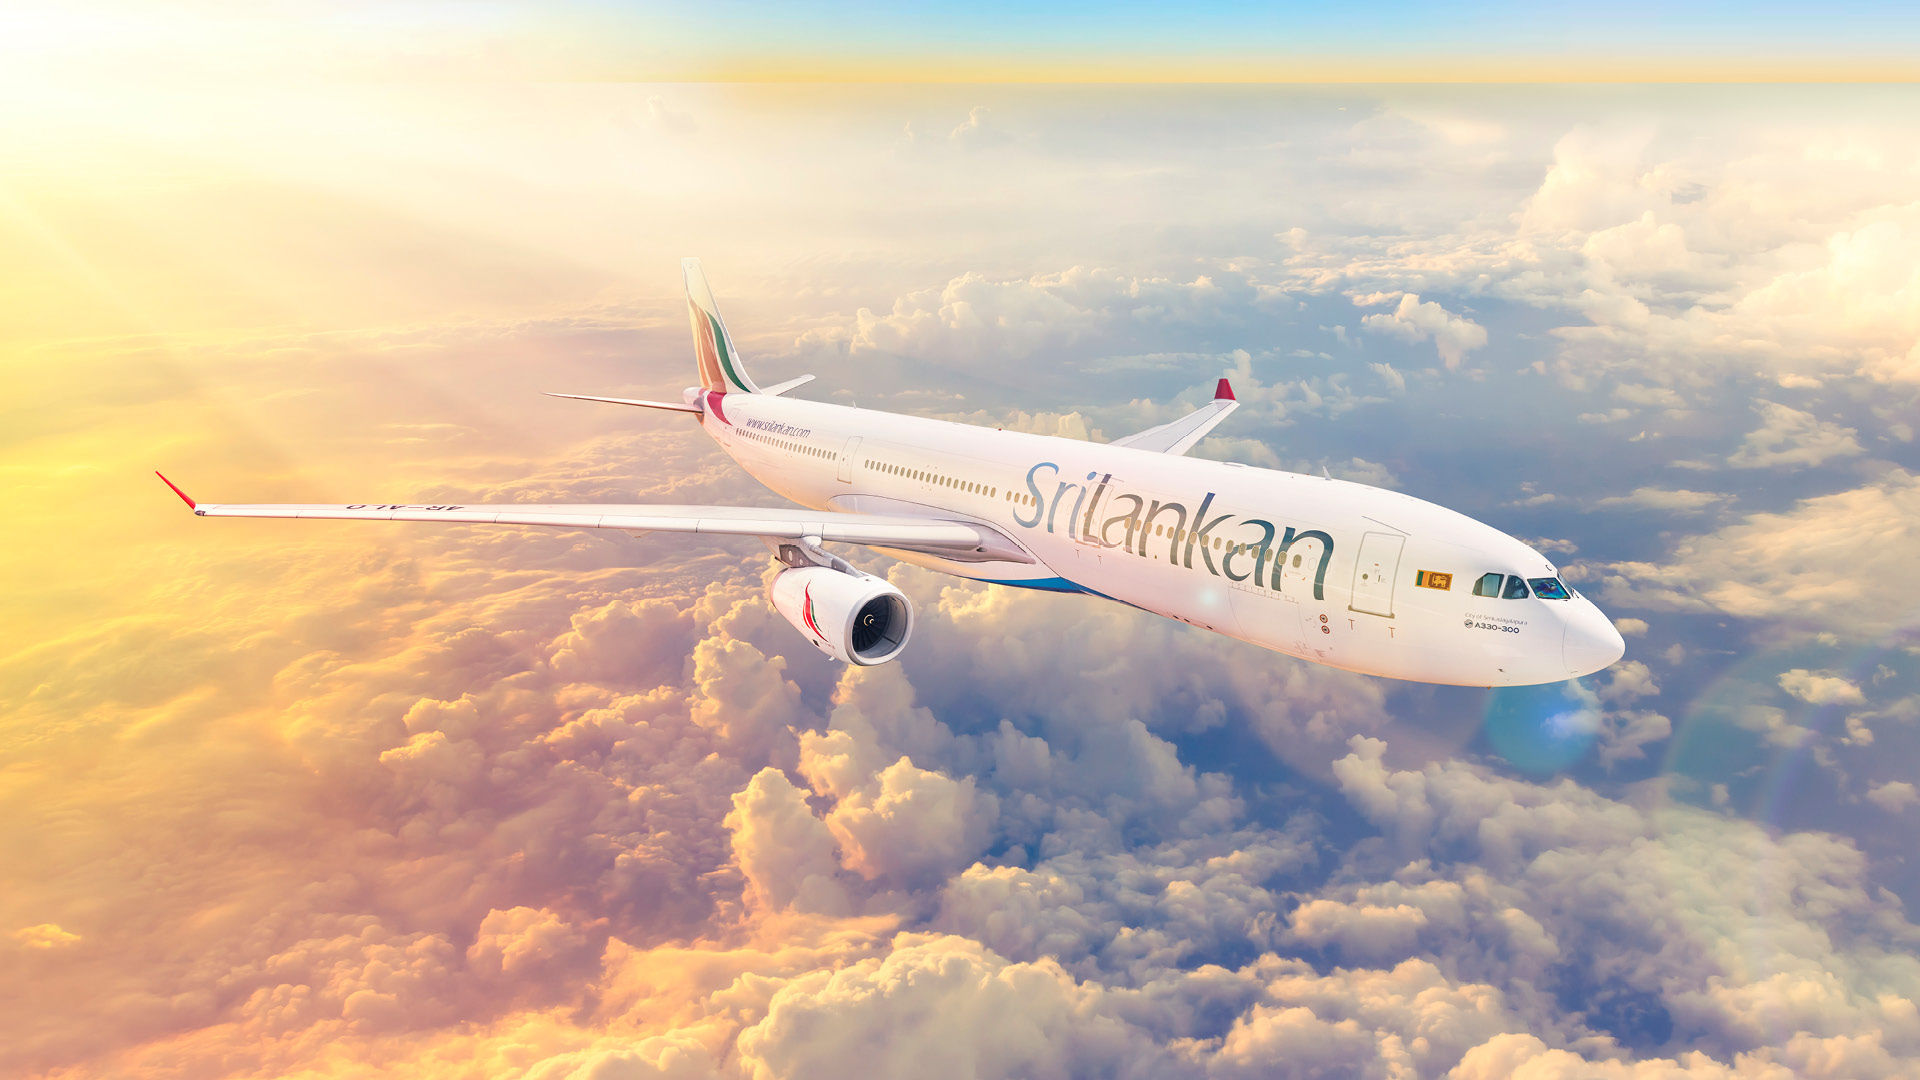 SriLankan Airlines Official